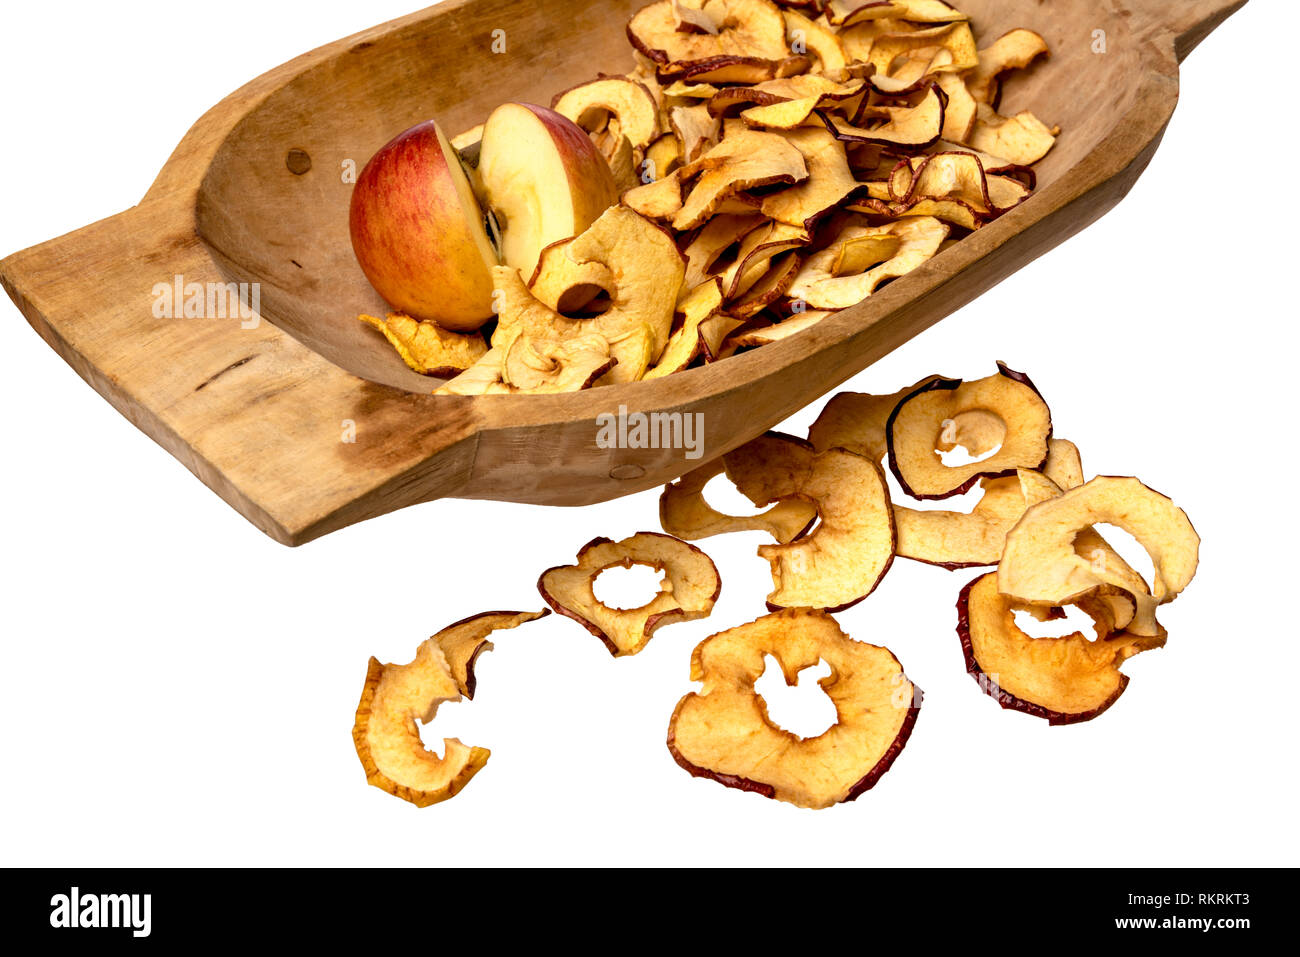 Dried apple rings lie on a board with a freshly cut apple Stock Photo